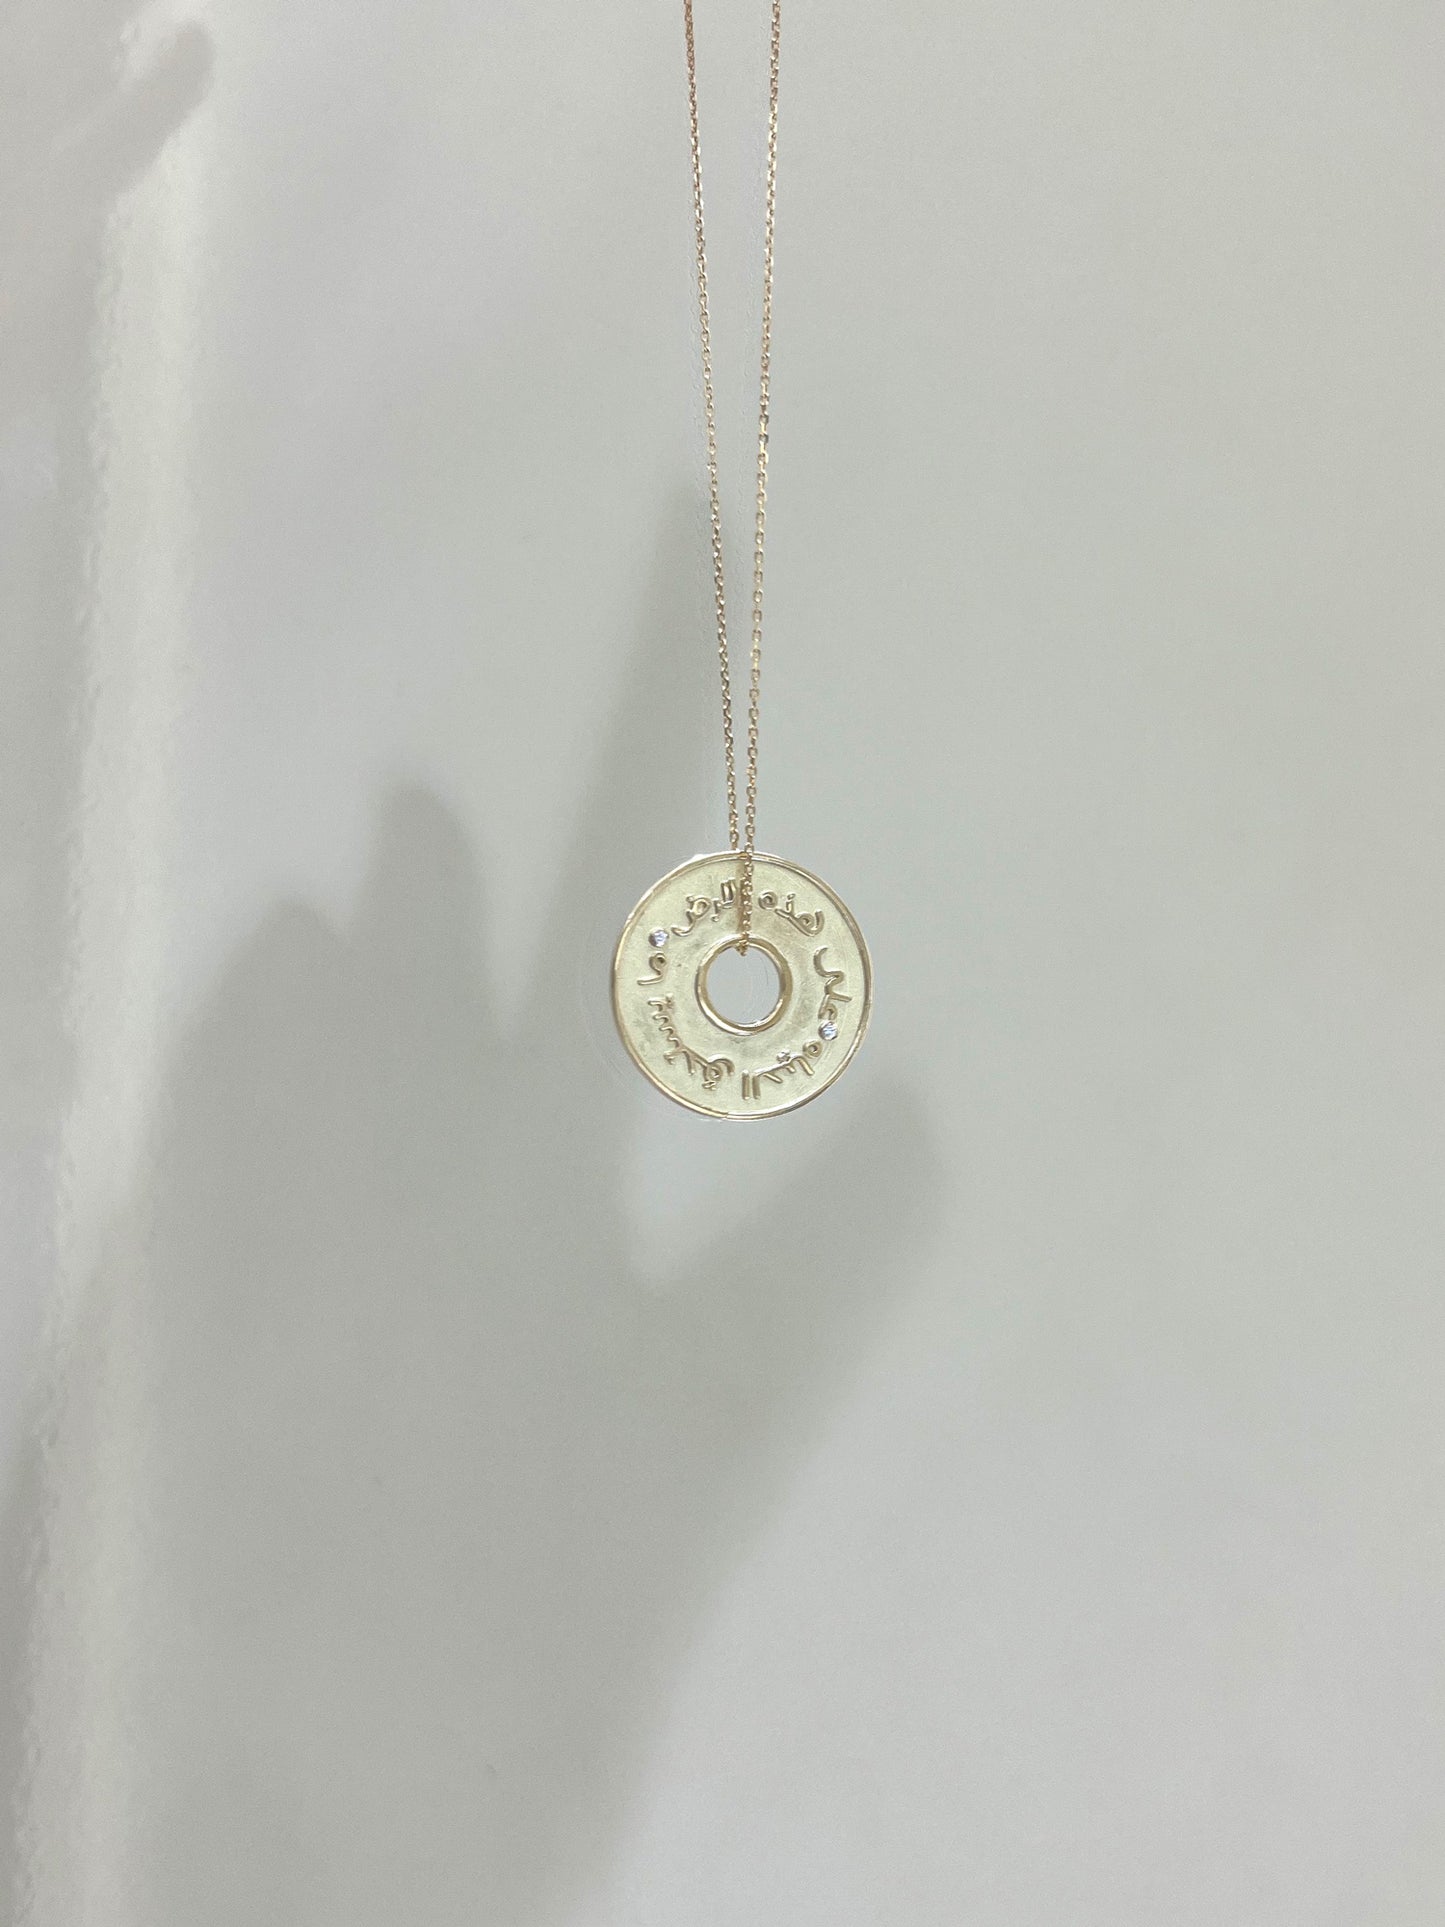 'On This Land' 14k gold coin necklace